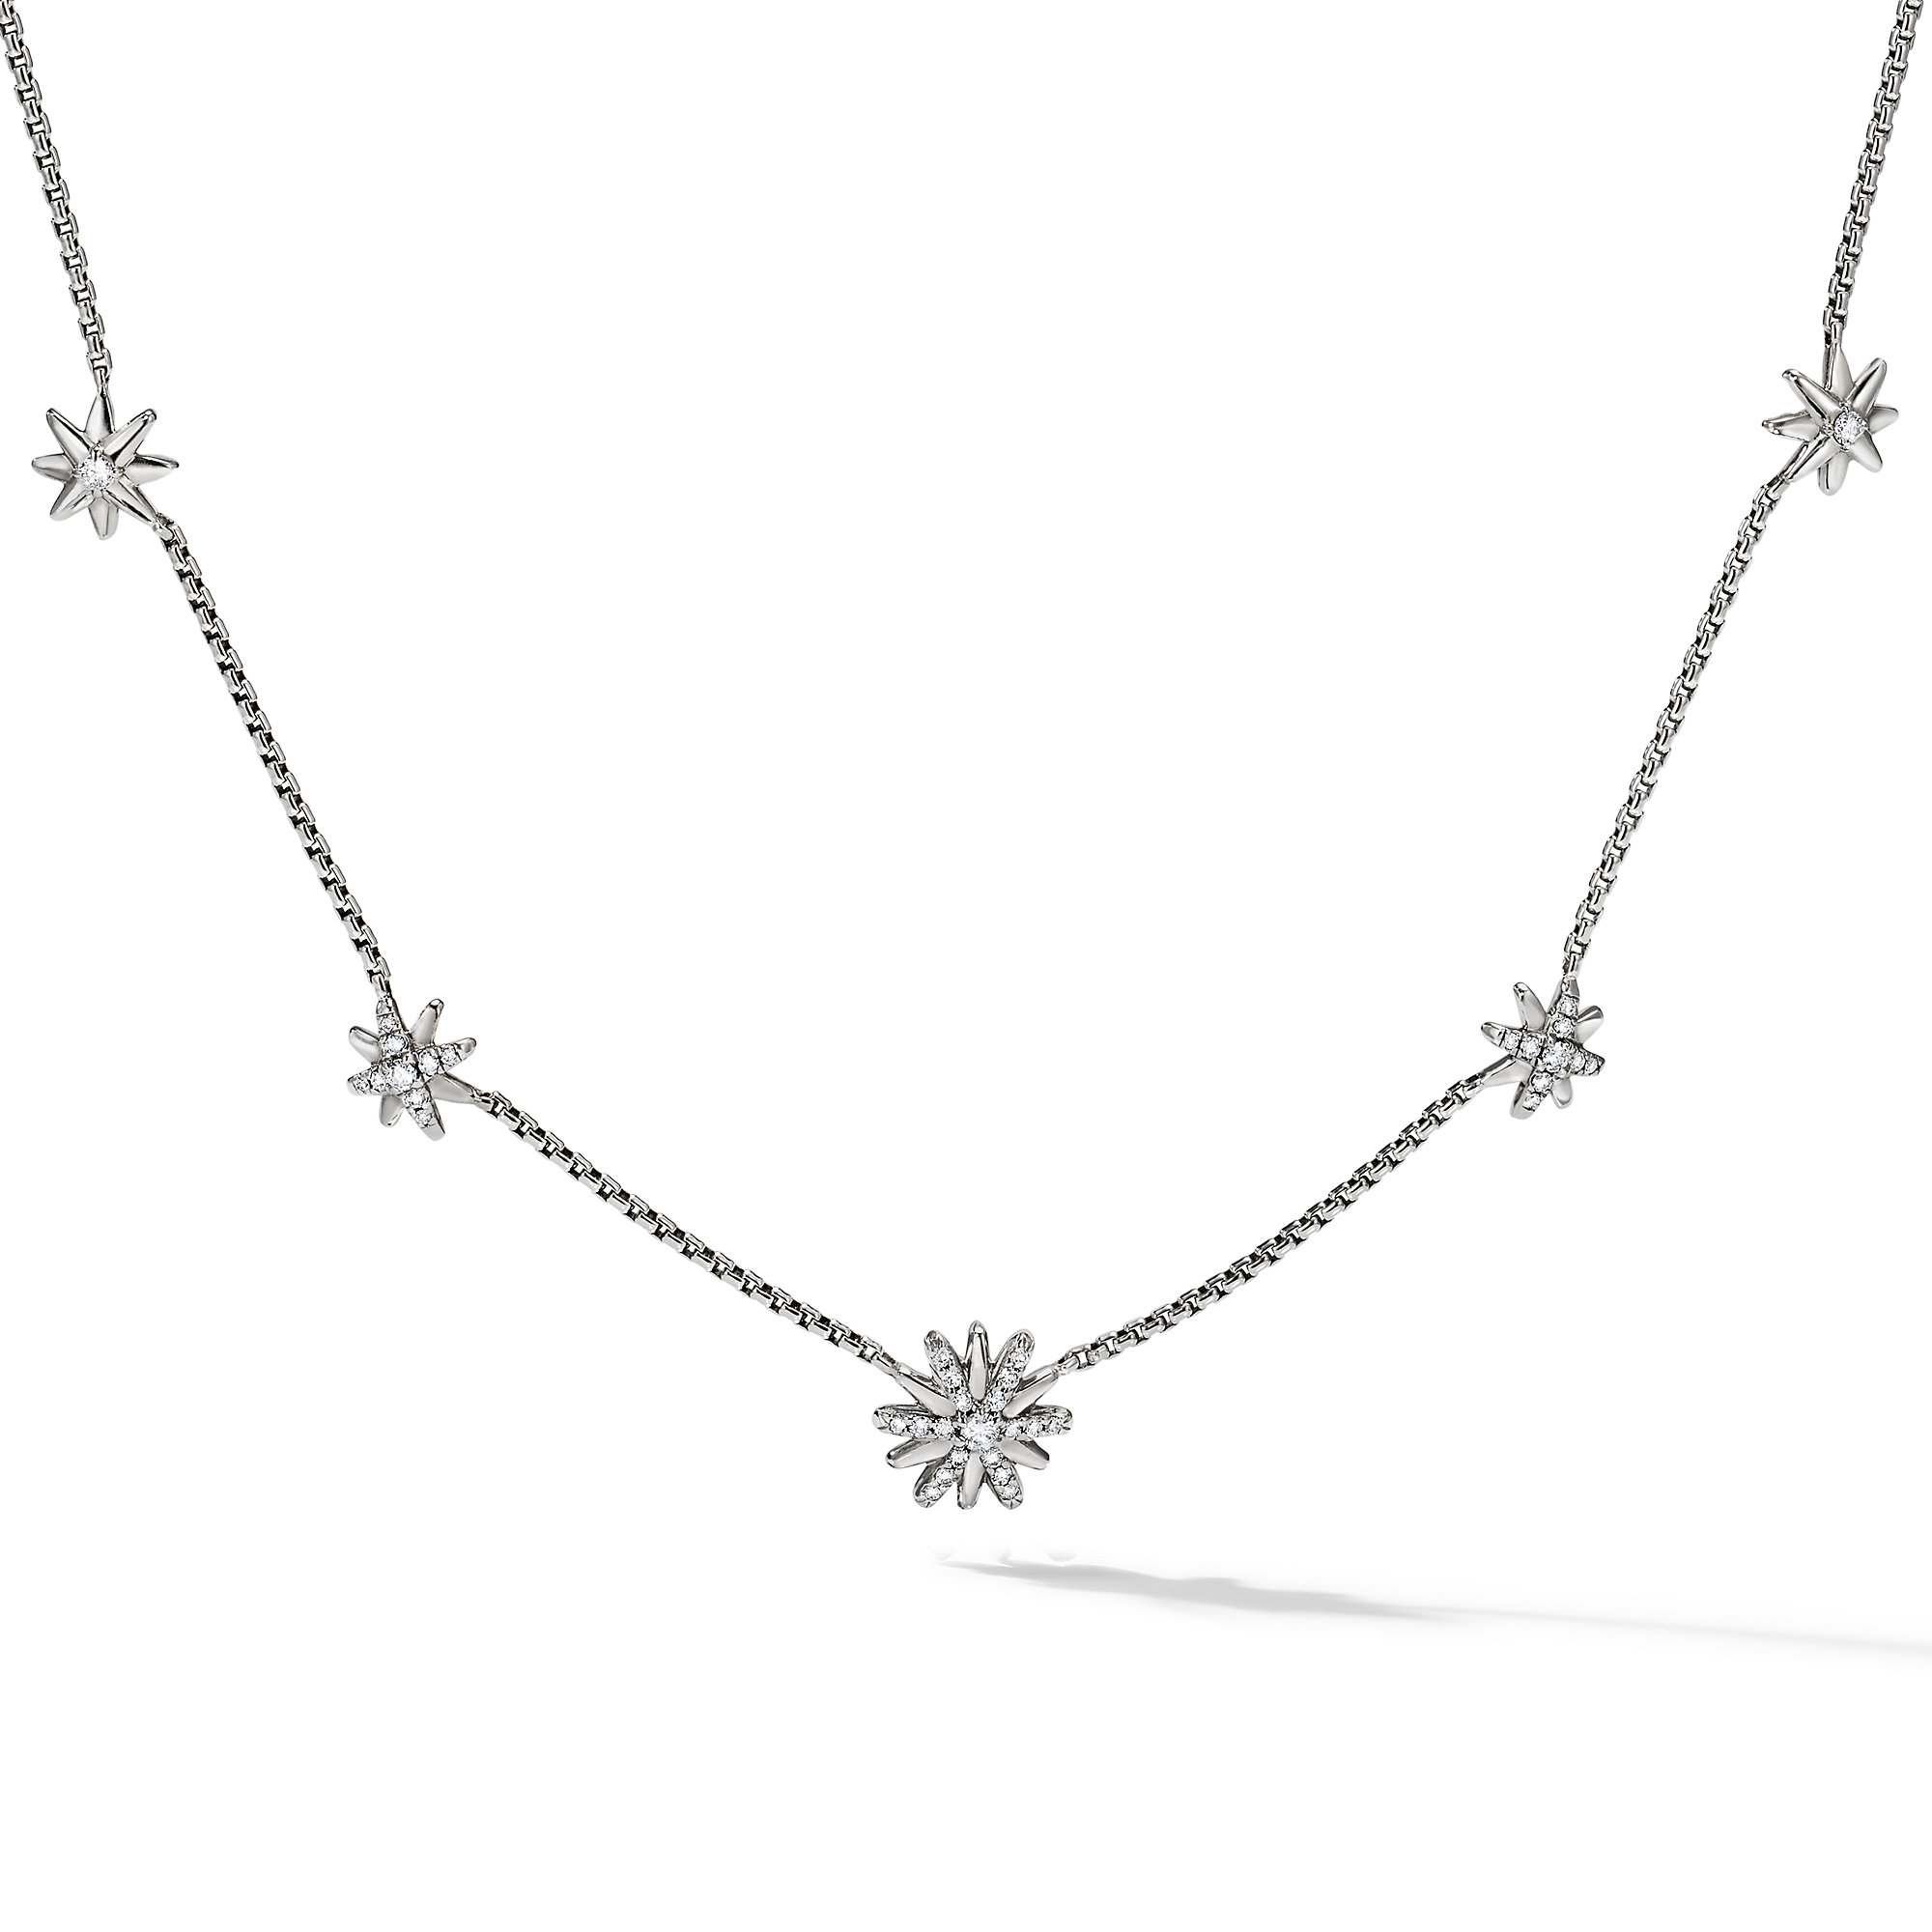 Starburst Station Chain Necklace in Sterling Silver with Pave Diamonds